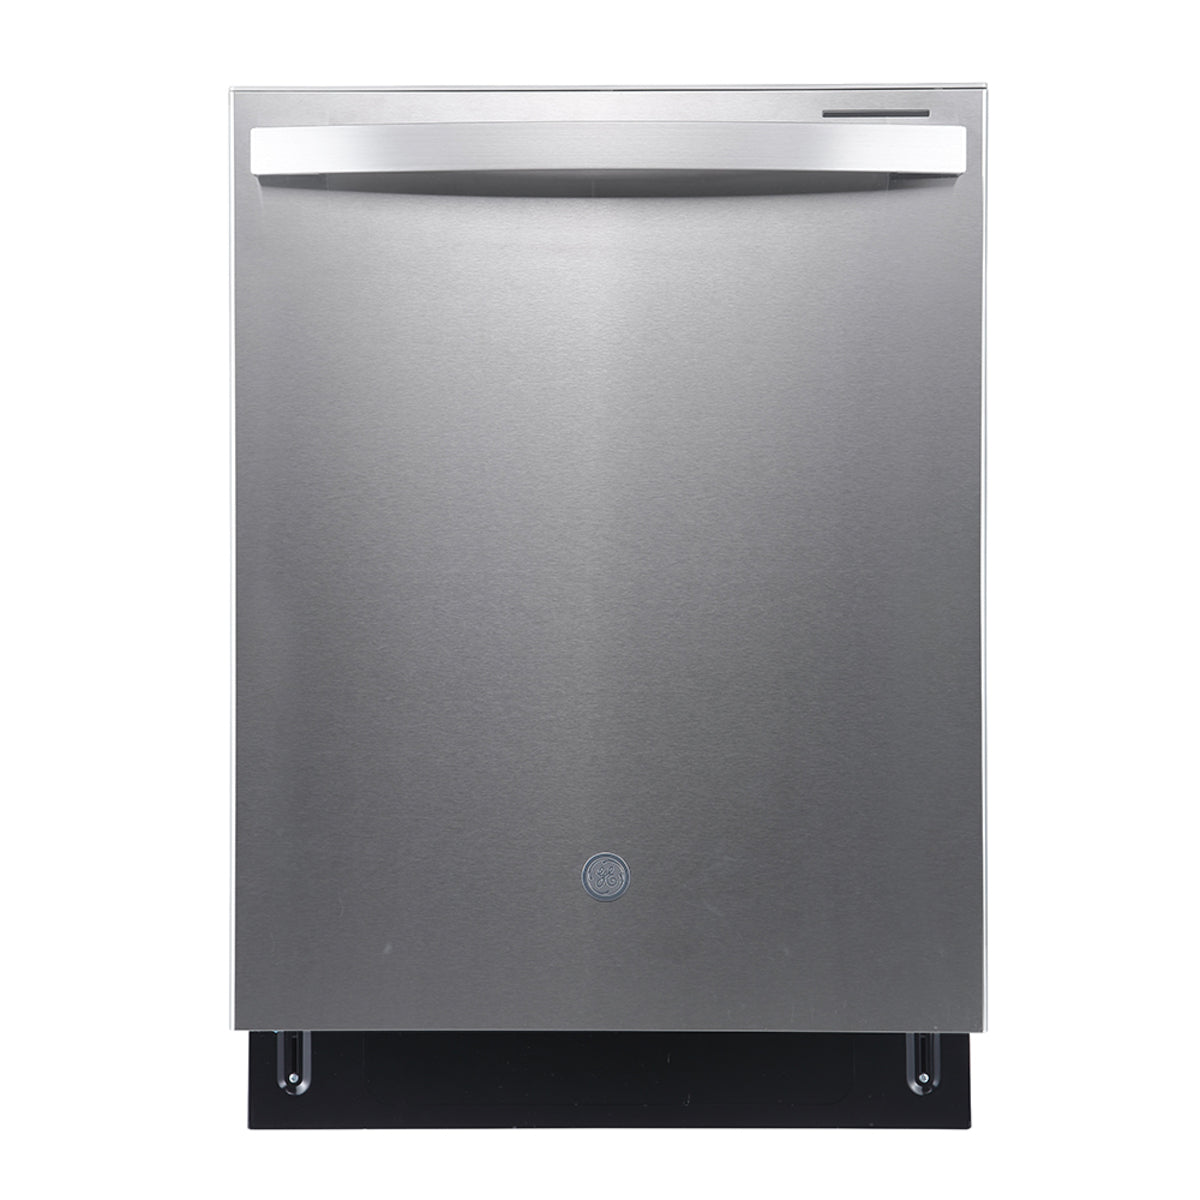 GE - 48 dBA Built In Dishwasher in Stainless - GBT640SSPSS